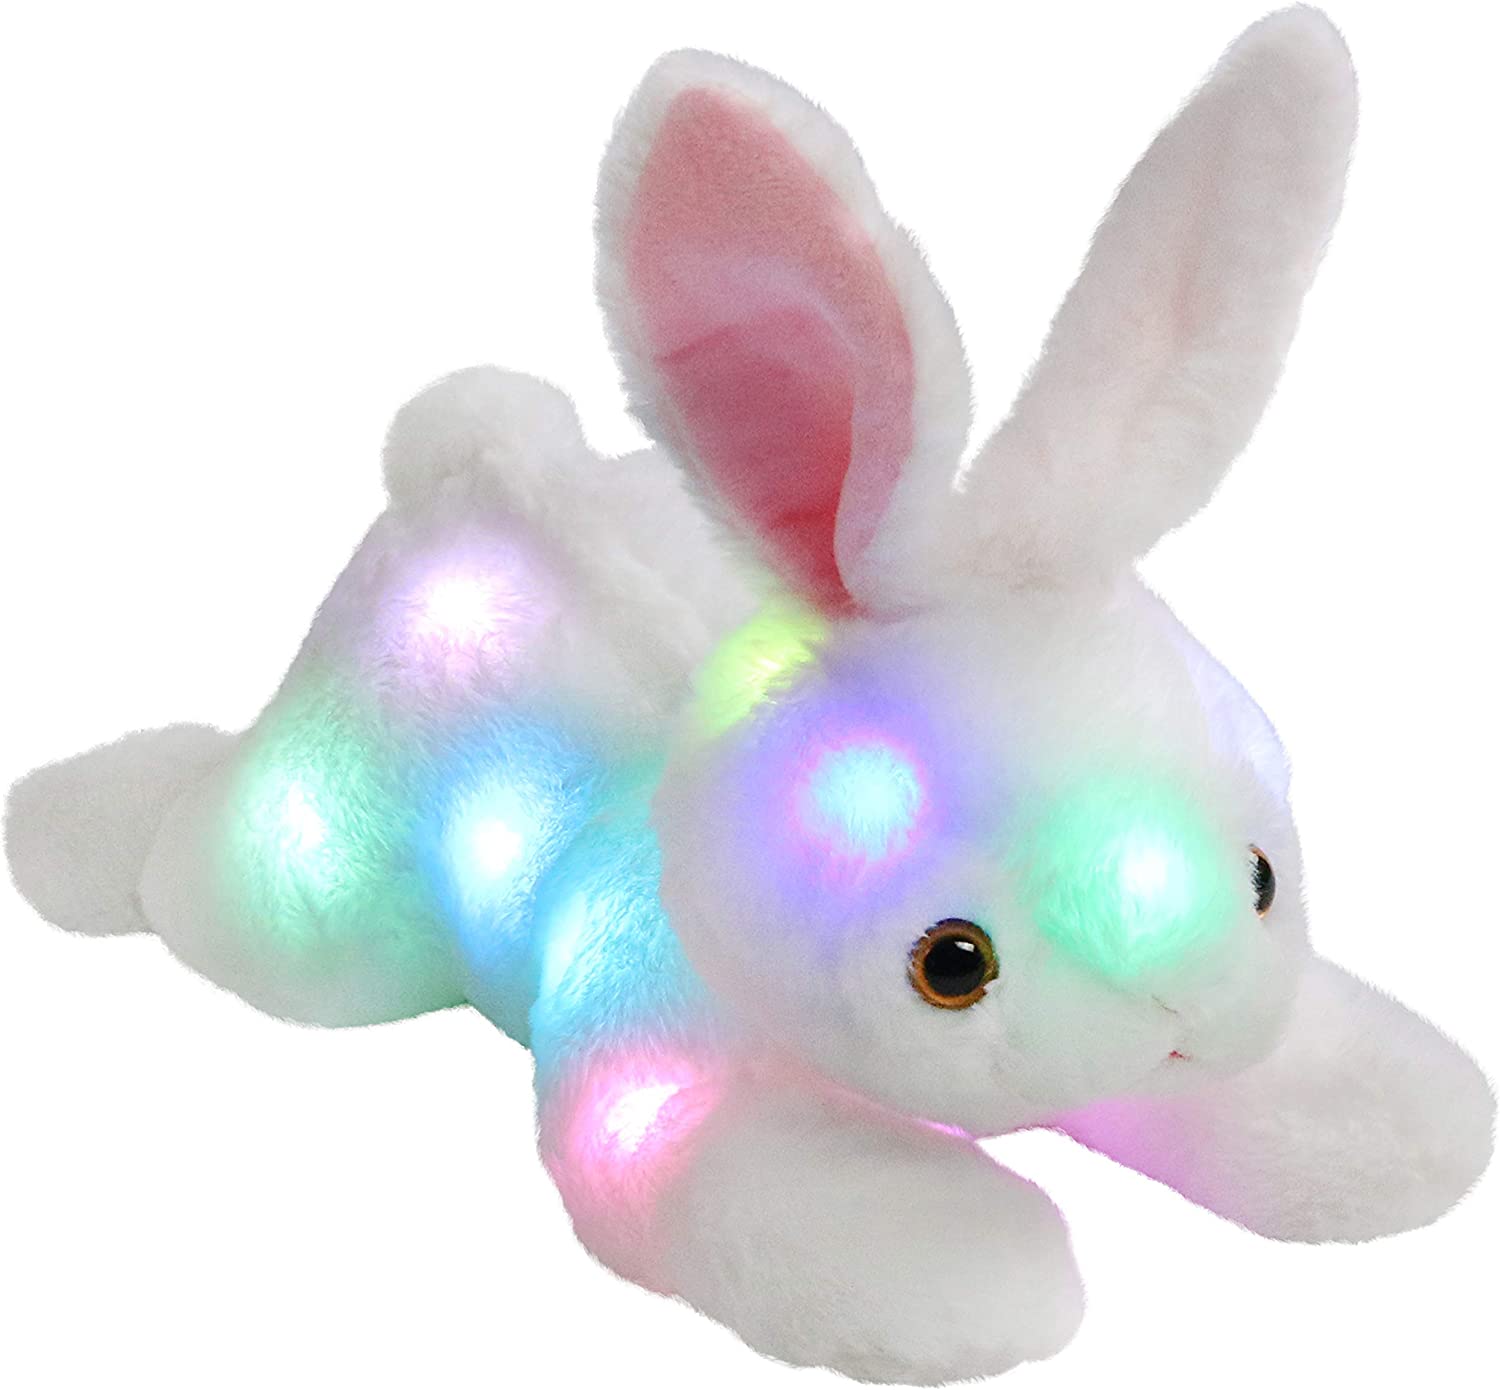 SpecialYou Light up Bunny Stuffed Animal Creative LED Rabbit Plush Toy Glow in The Dark Bedtime Companion Easter Birthday for Kids, 14’’